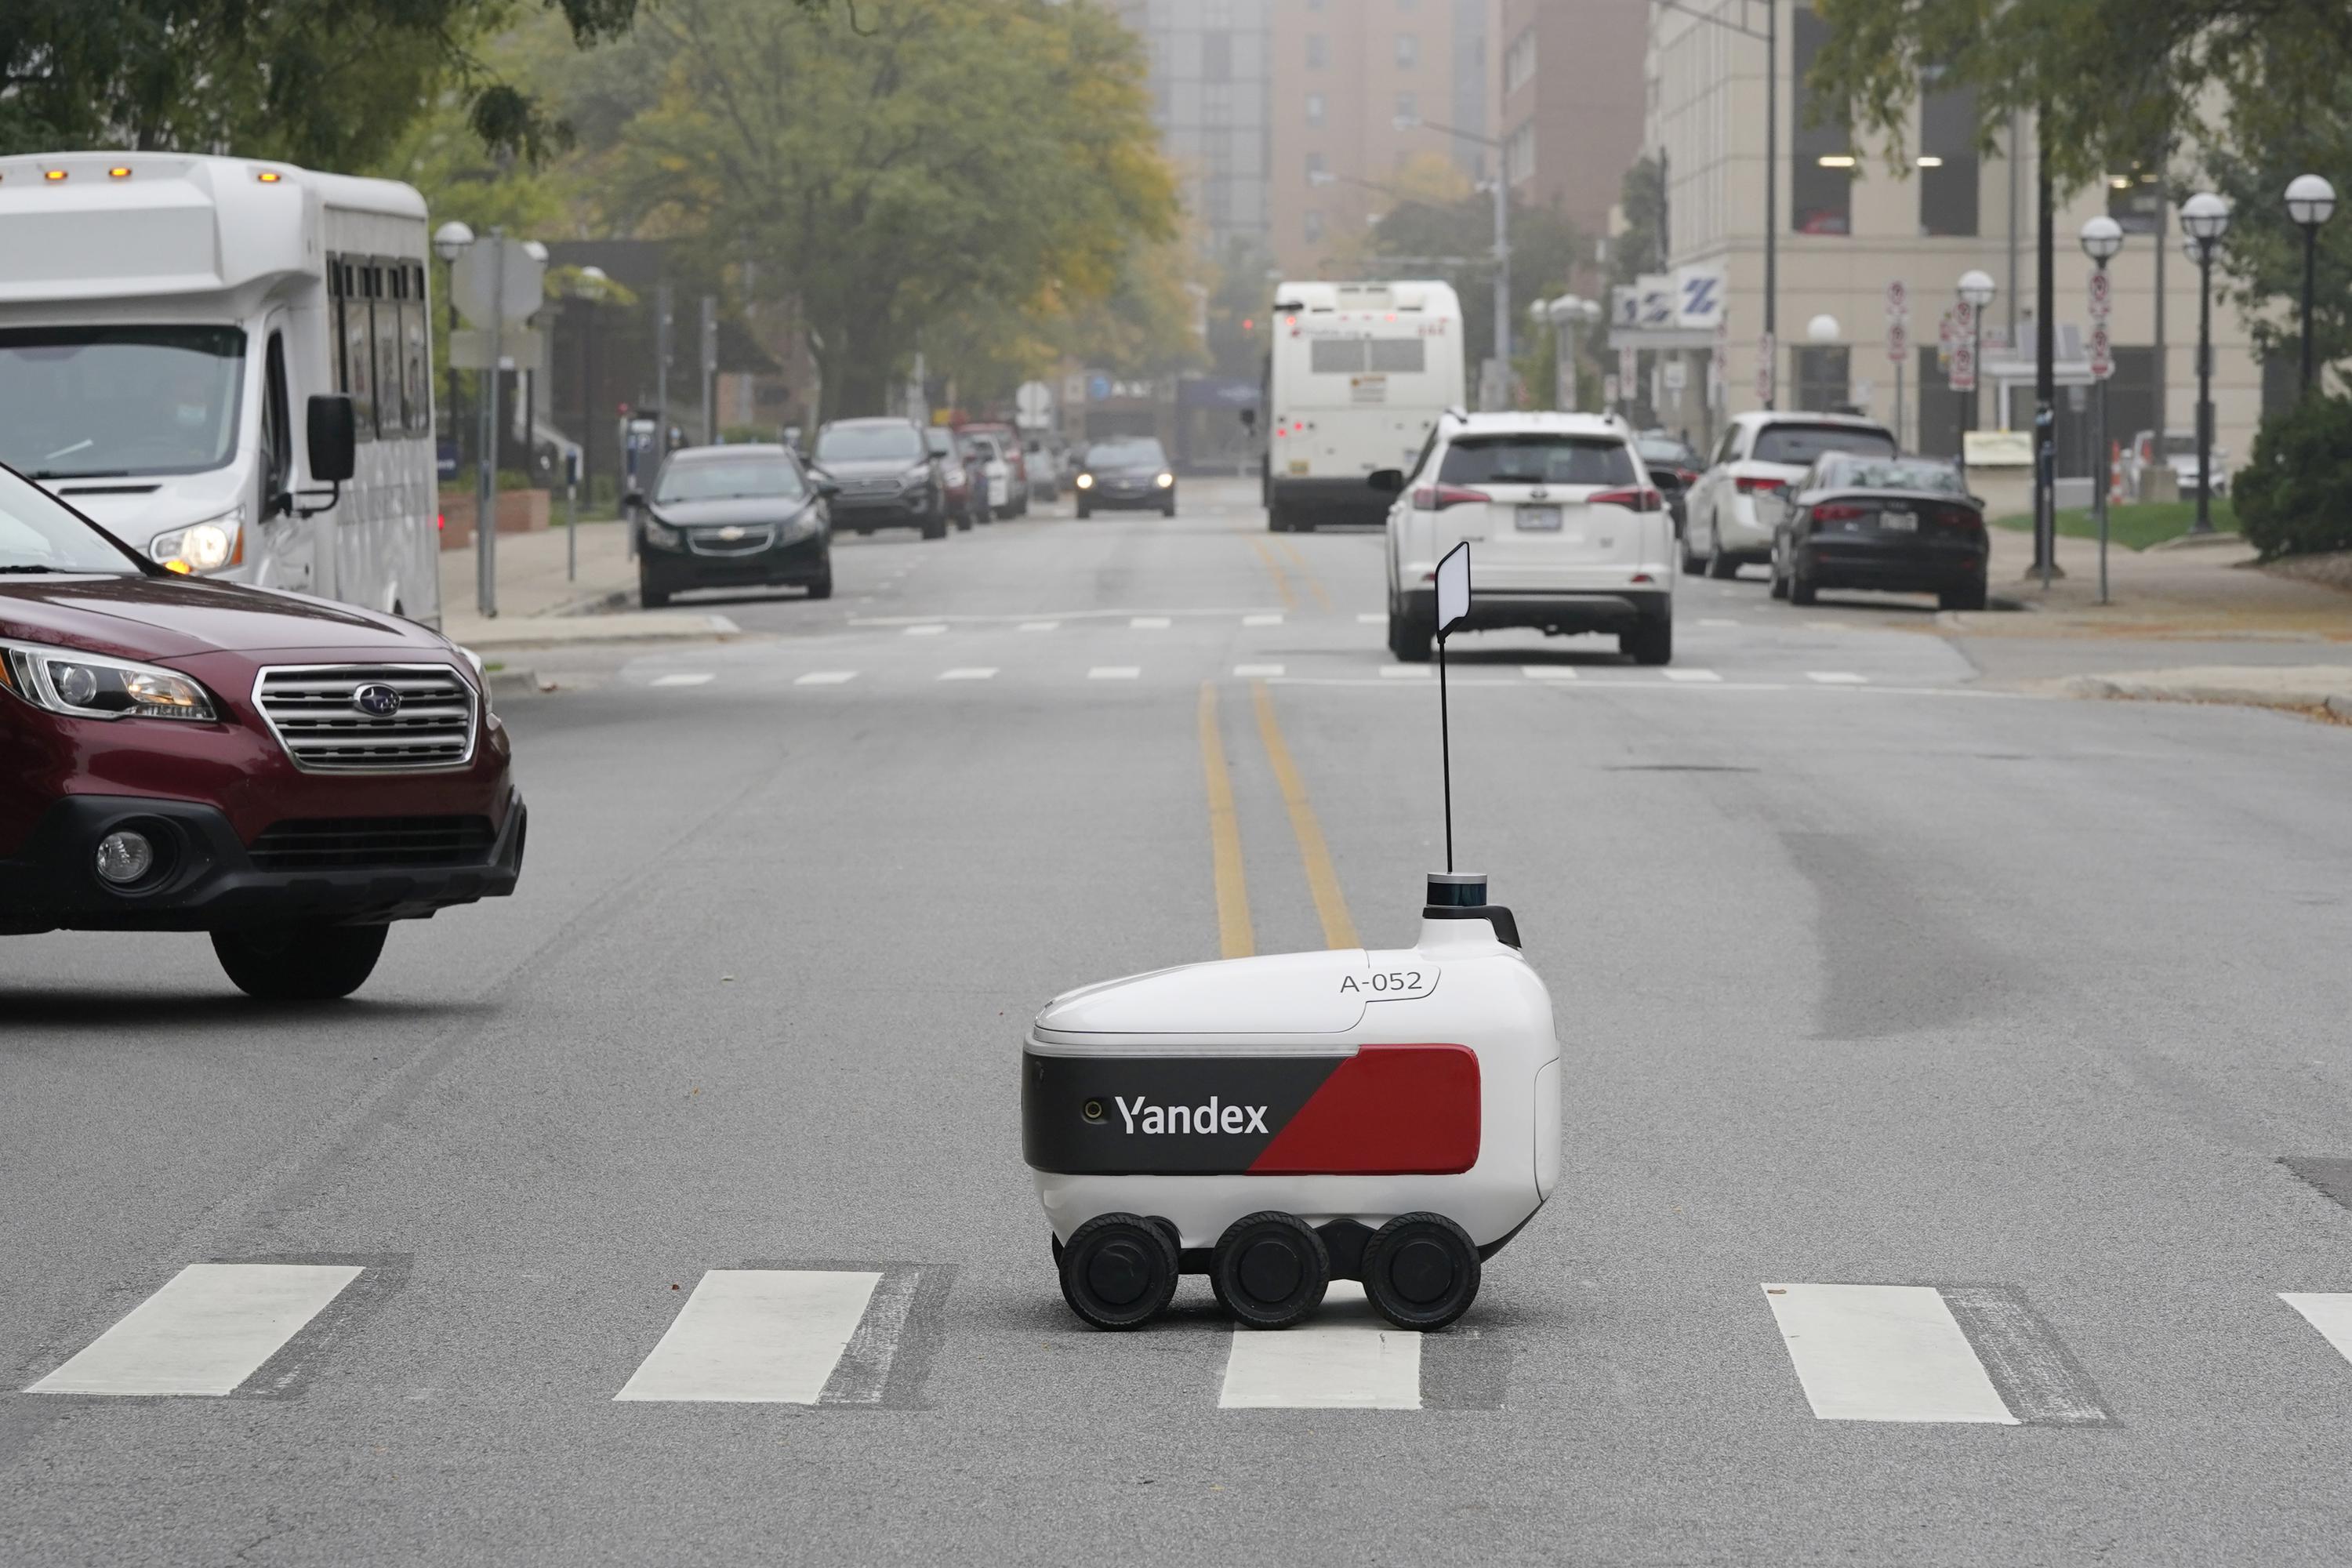 enke bro Finde sig i Robots hit the streets as demand for food delivery grows | AP News